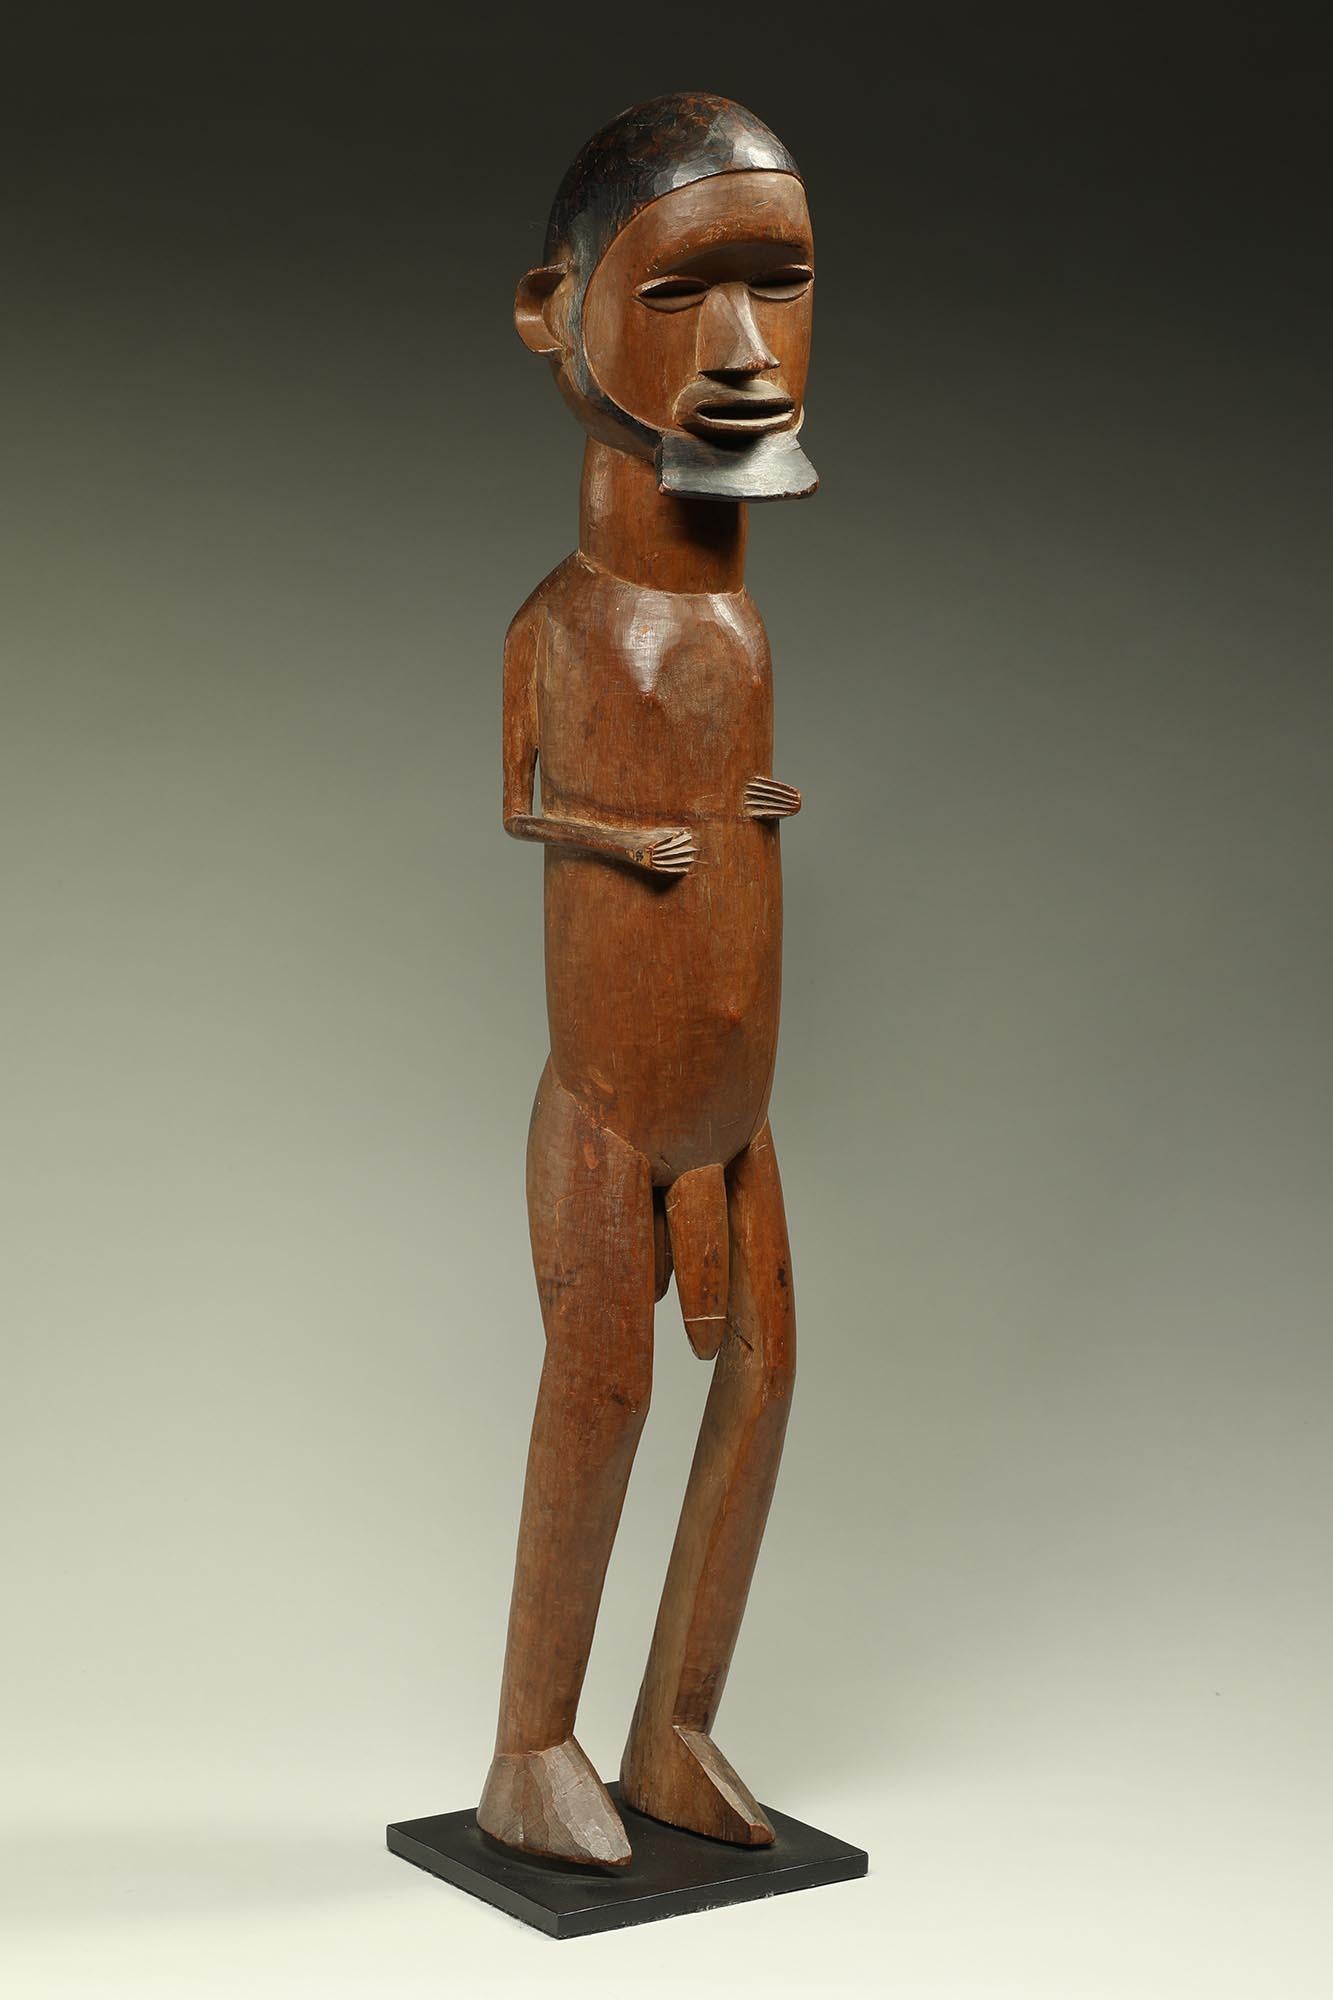 20th Century Large standing male Teke figure with expressive face, beard, Congo, DRC Africa